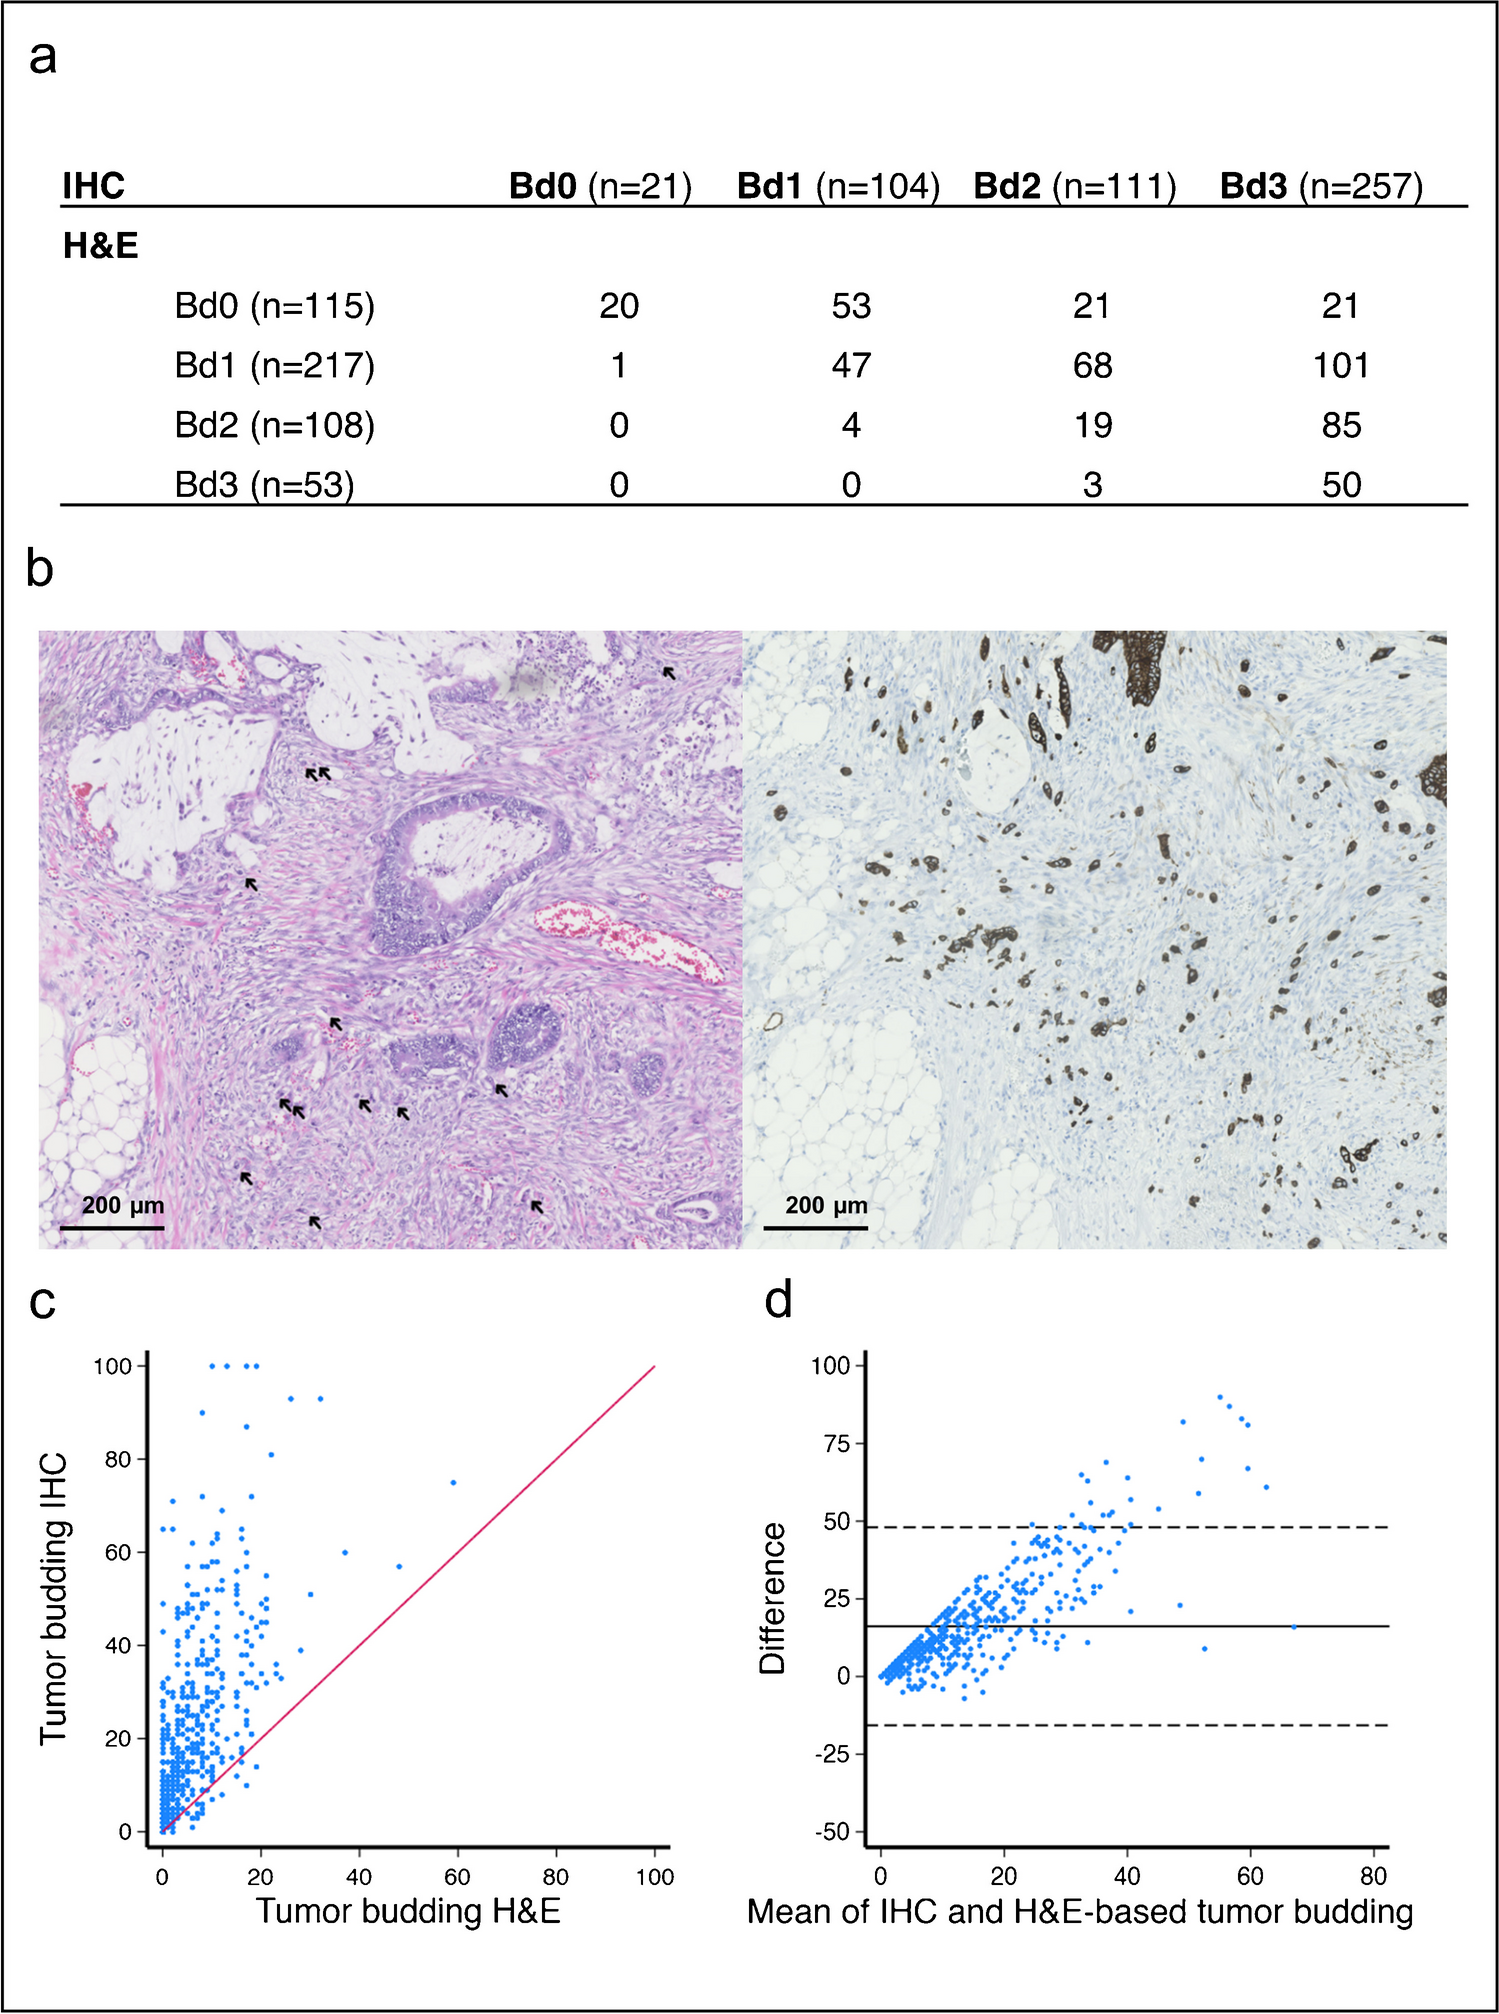 Immunohistochemical analysis of tumor budding in stage II colon cancer: exploring zero budding as a prognostic marker